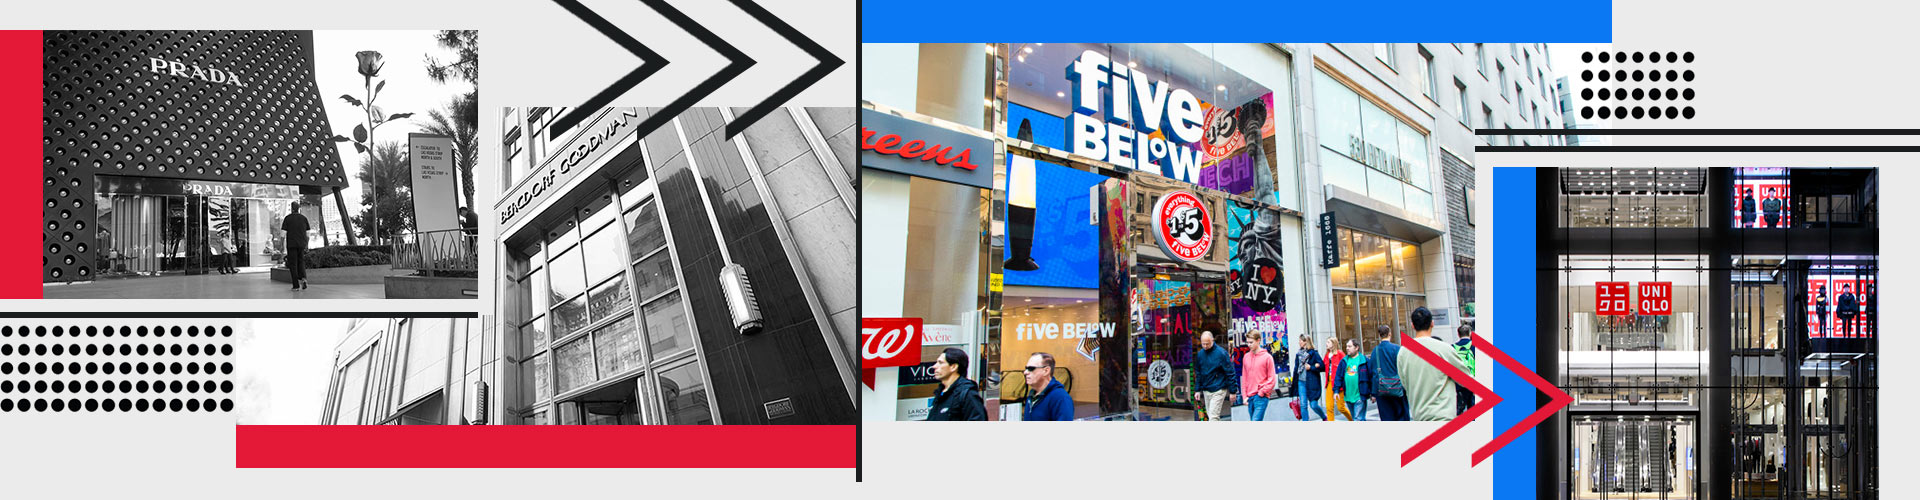 Democratized Retail banner featuring collage of high end Prada and Bergdorf Goodman stores and low end Five Below and Uniqlo stores